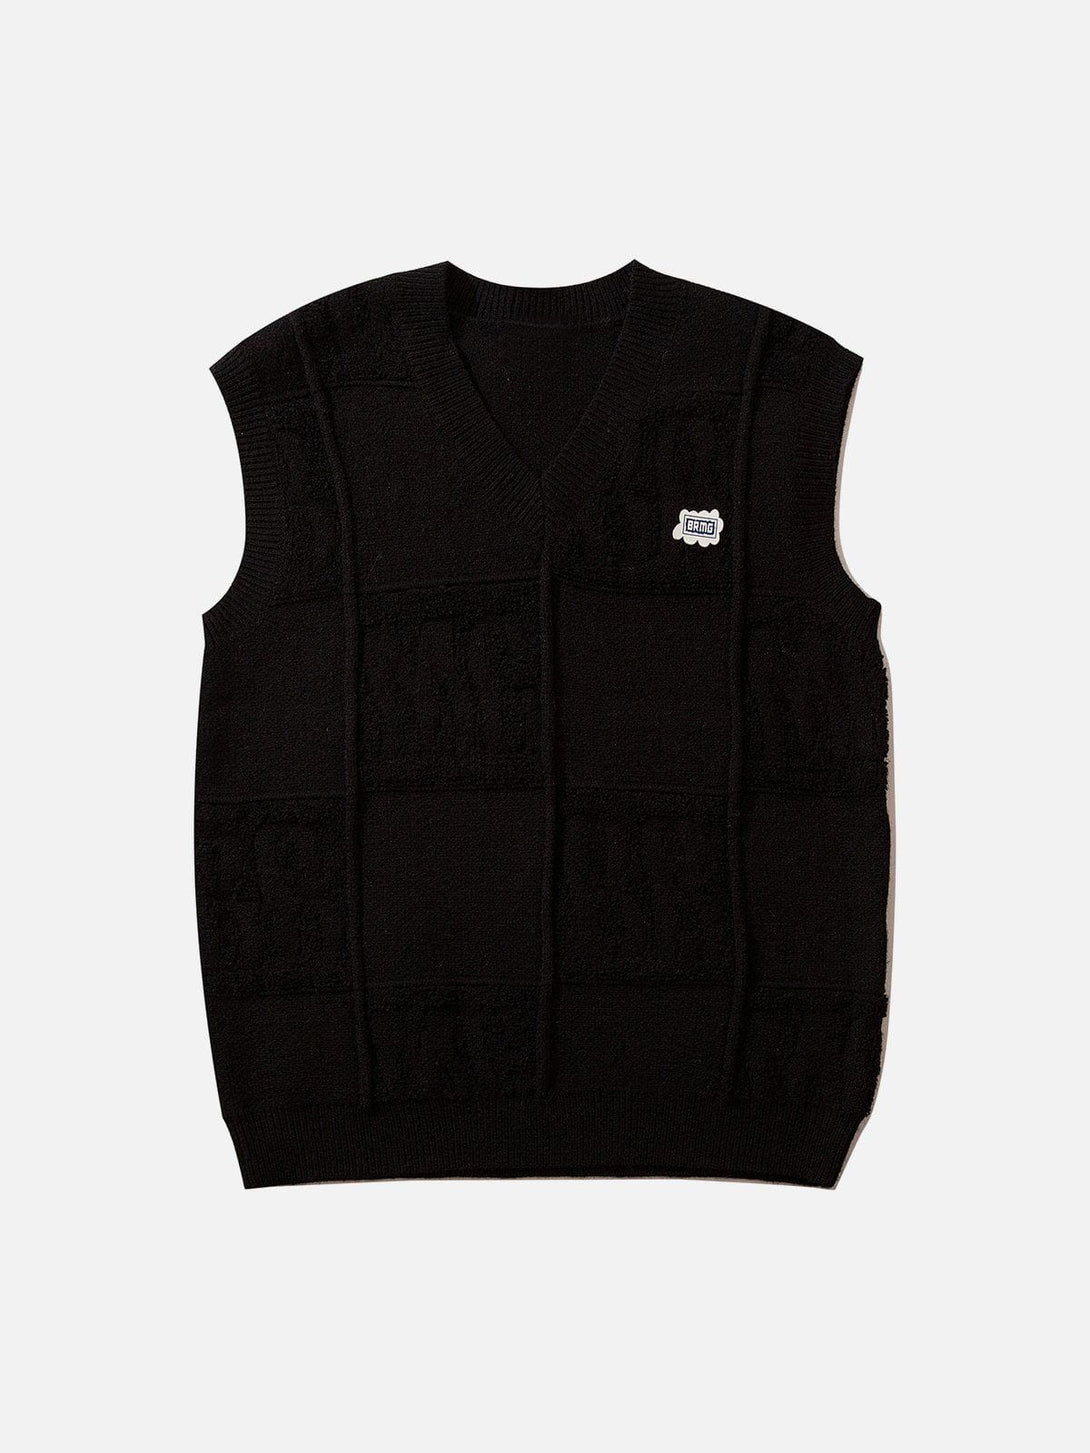 Levefly - Solid Color Plaid Sweater Vest - Streetwear Fashion - levefly.com